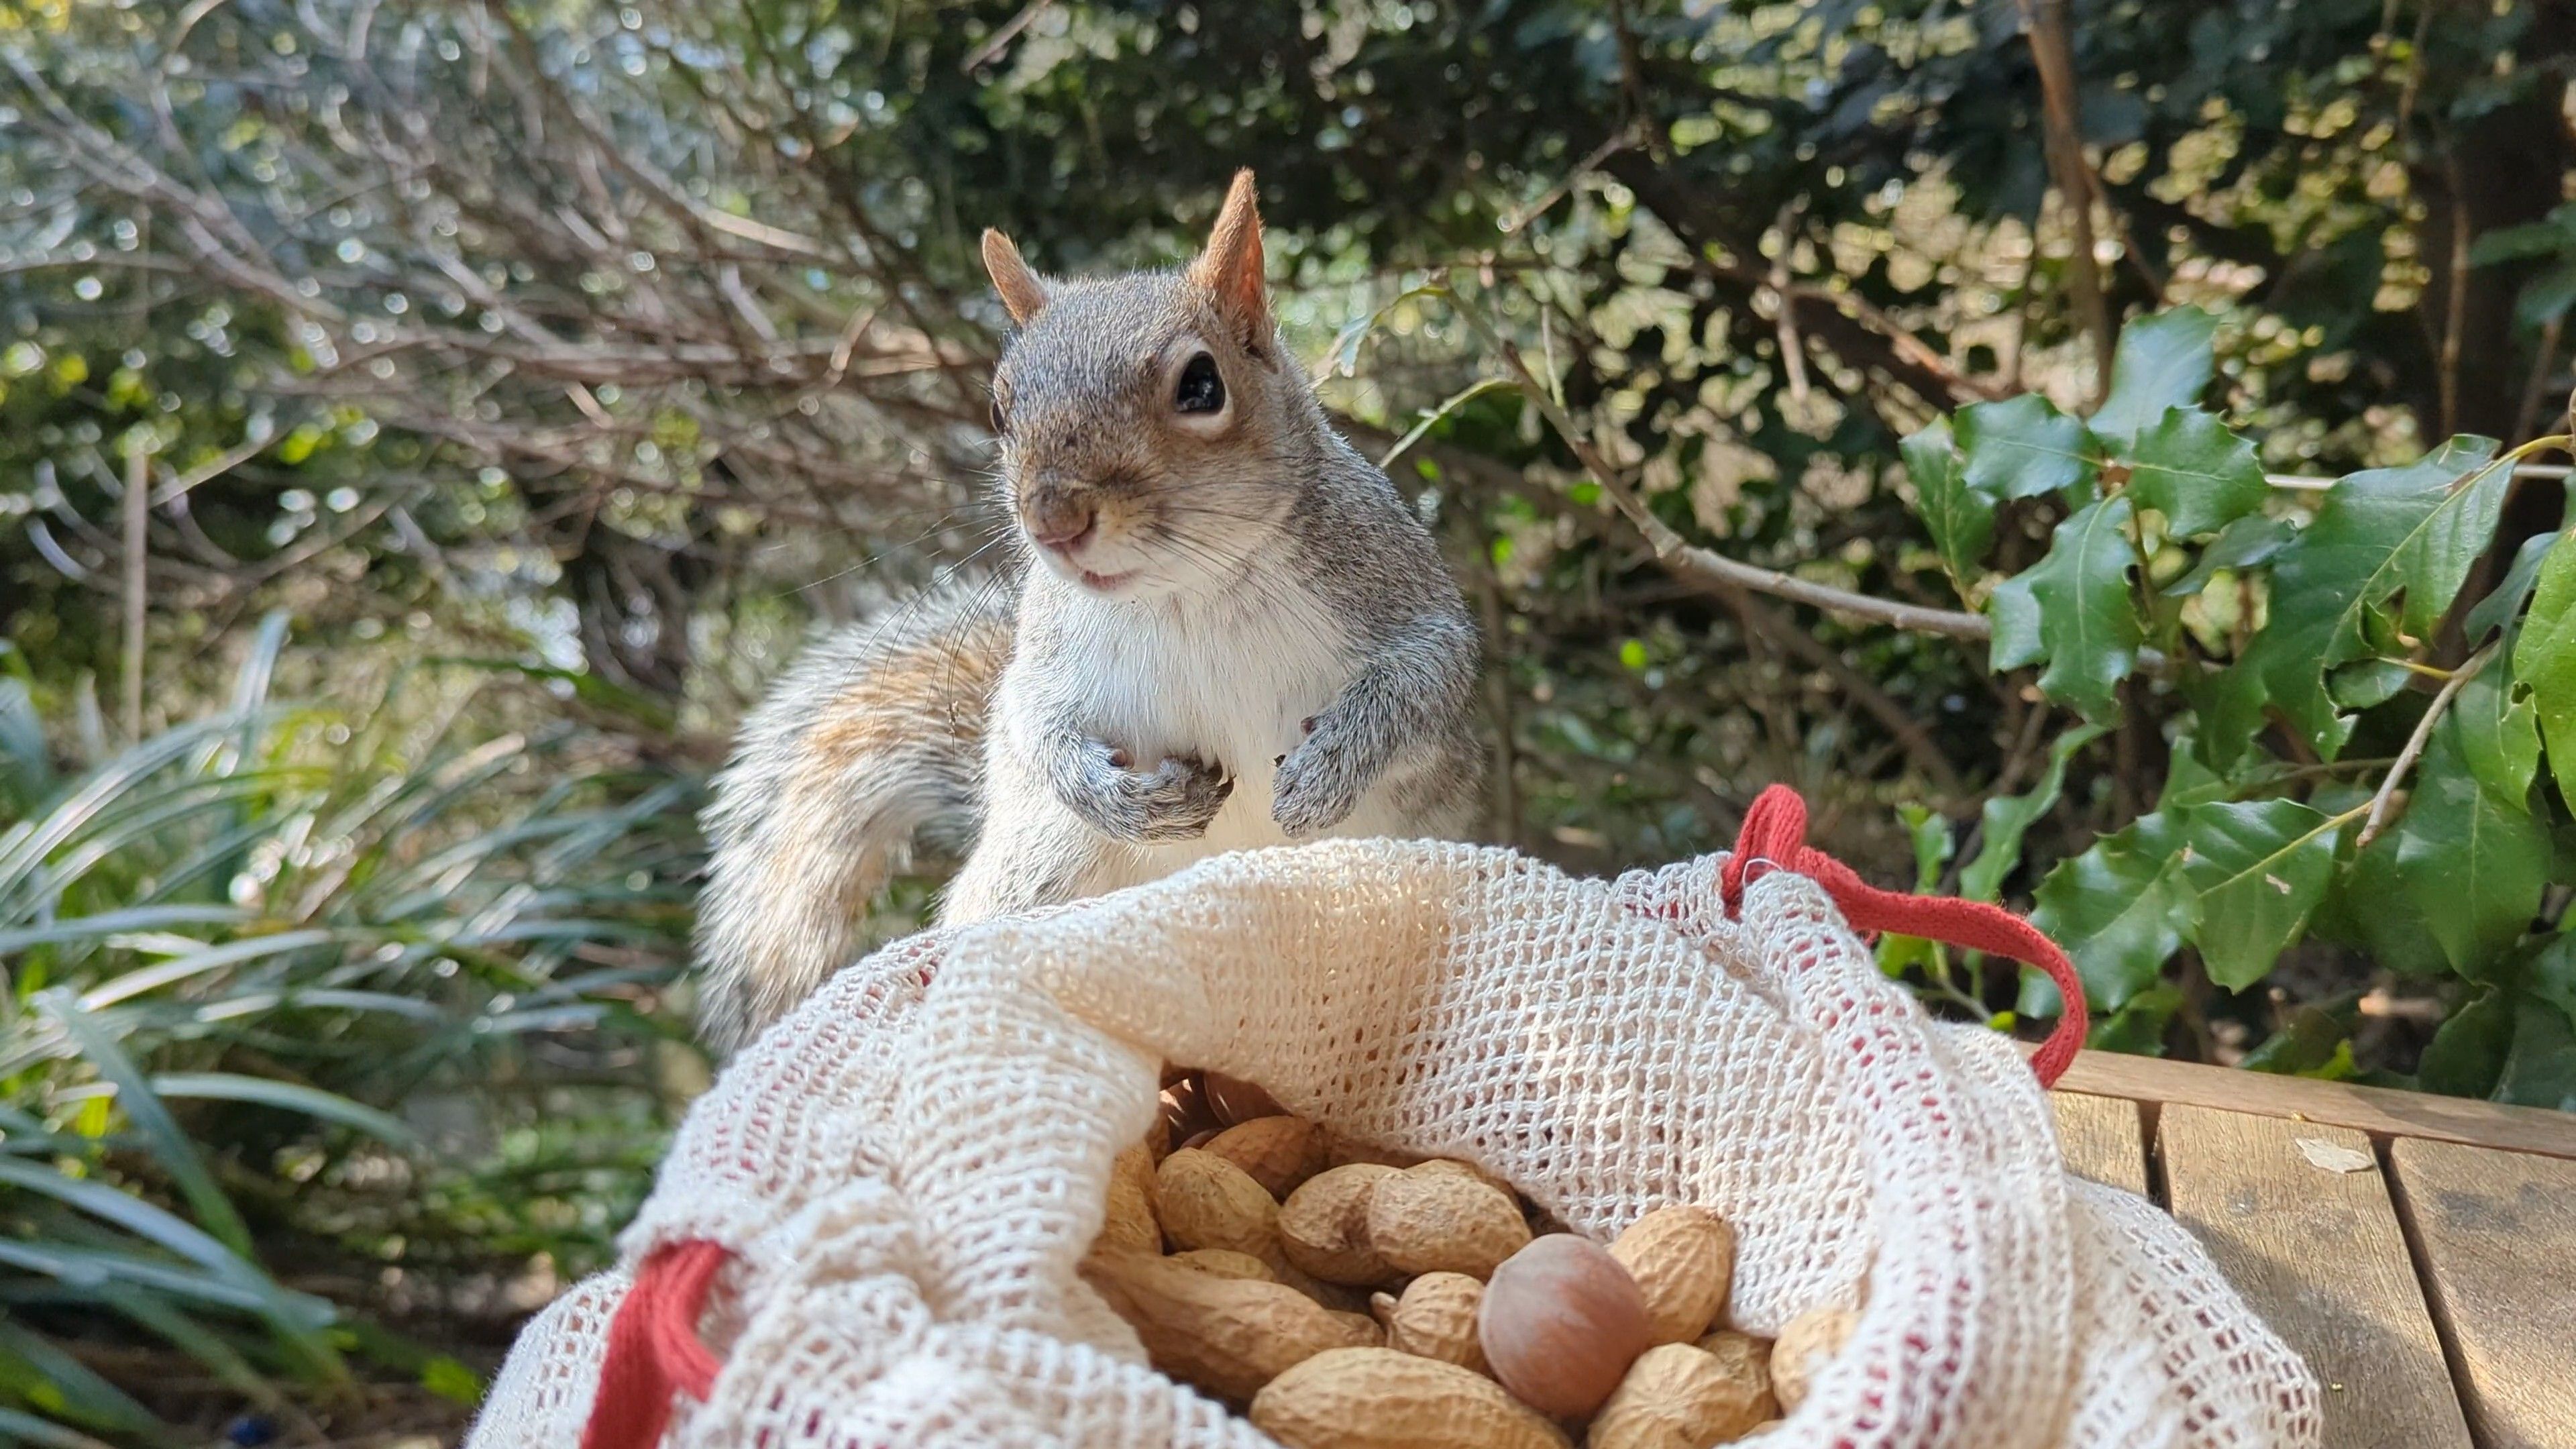 A photo of a grey squirrel posing behind an open bag of nuts on the end of a park bench. Various plants and bushes are in the background.